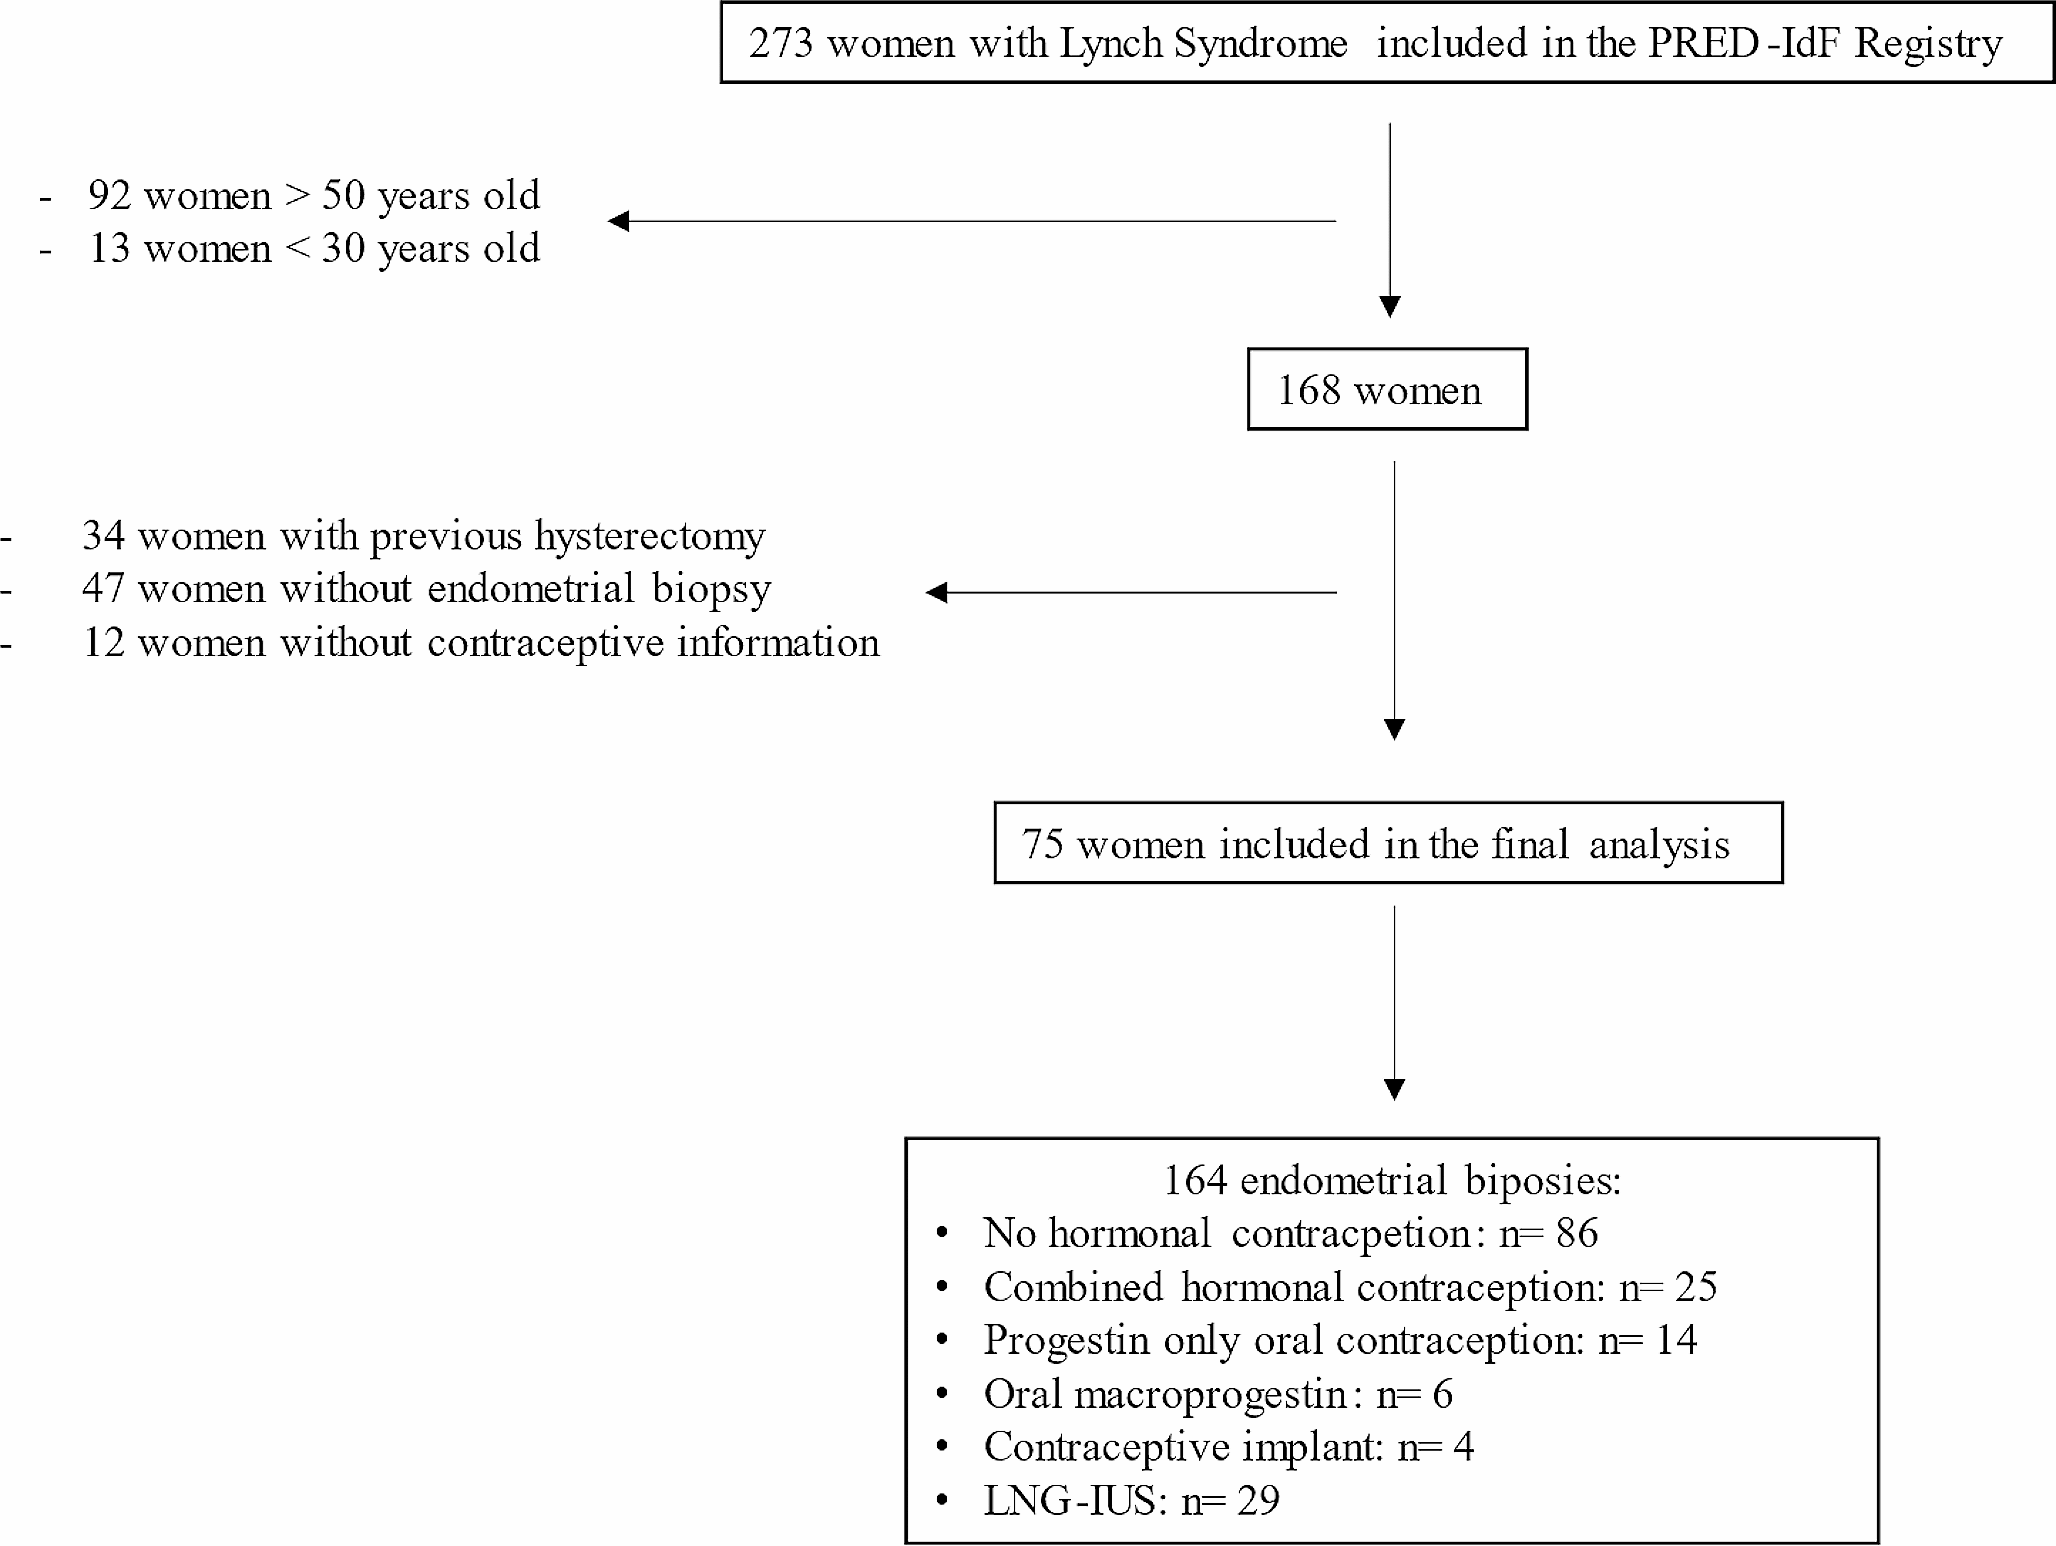 Impact of hormonal contraception on endometrial histology in patients with Lynch syndrome, a retrospective pilot study